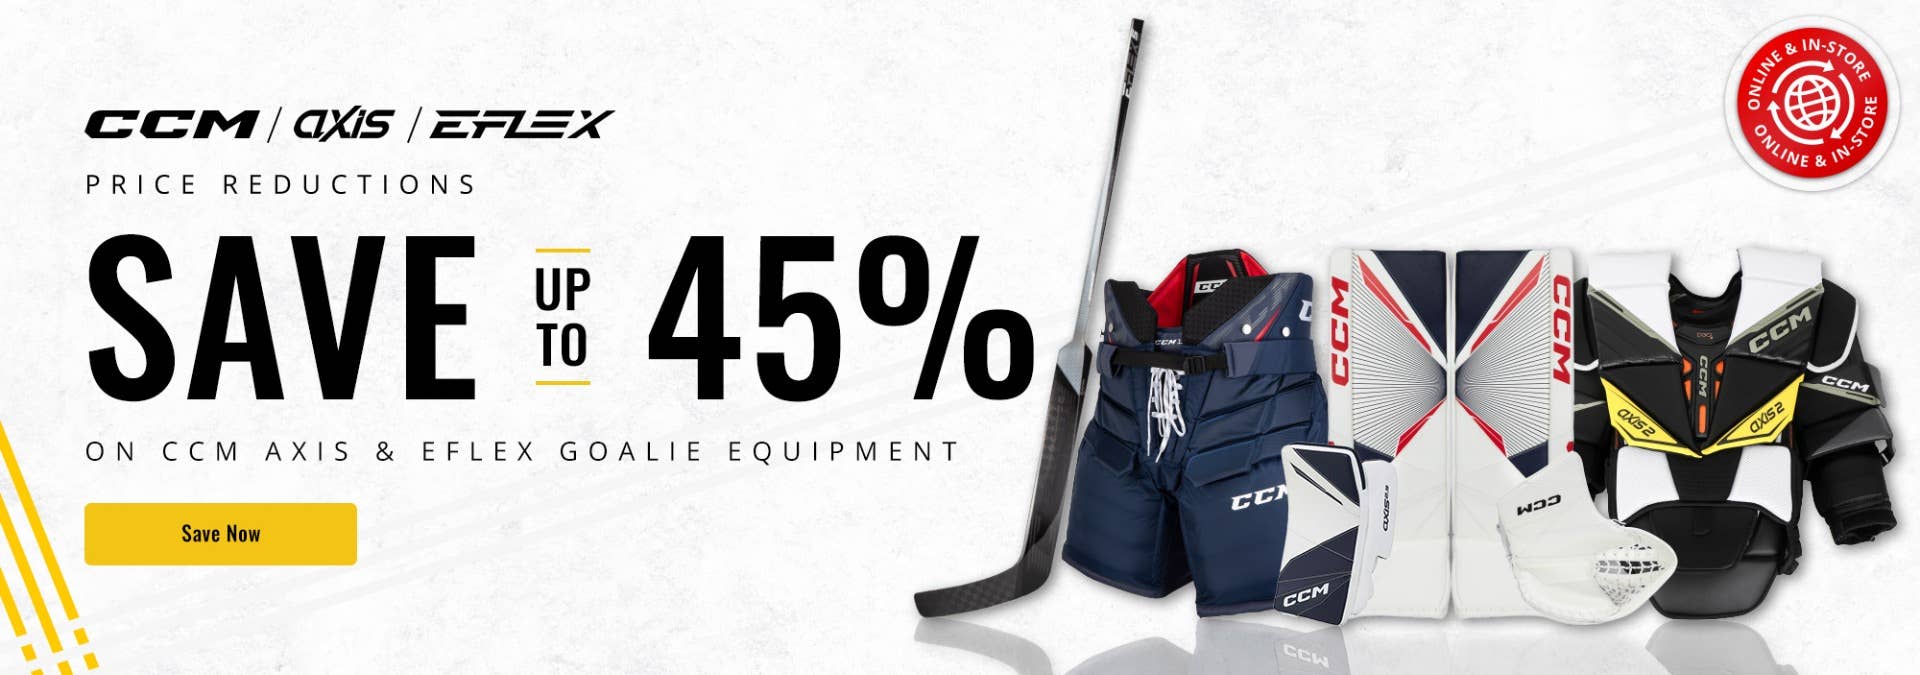 CCM Price Reductions: Save on Axis & Extreme Flex Goalie Equipment